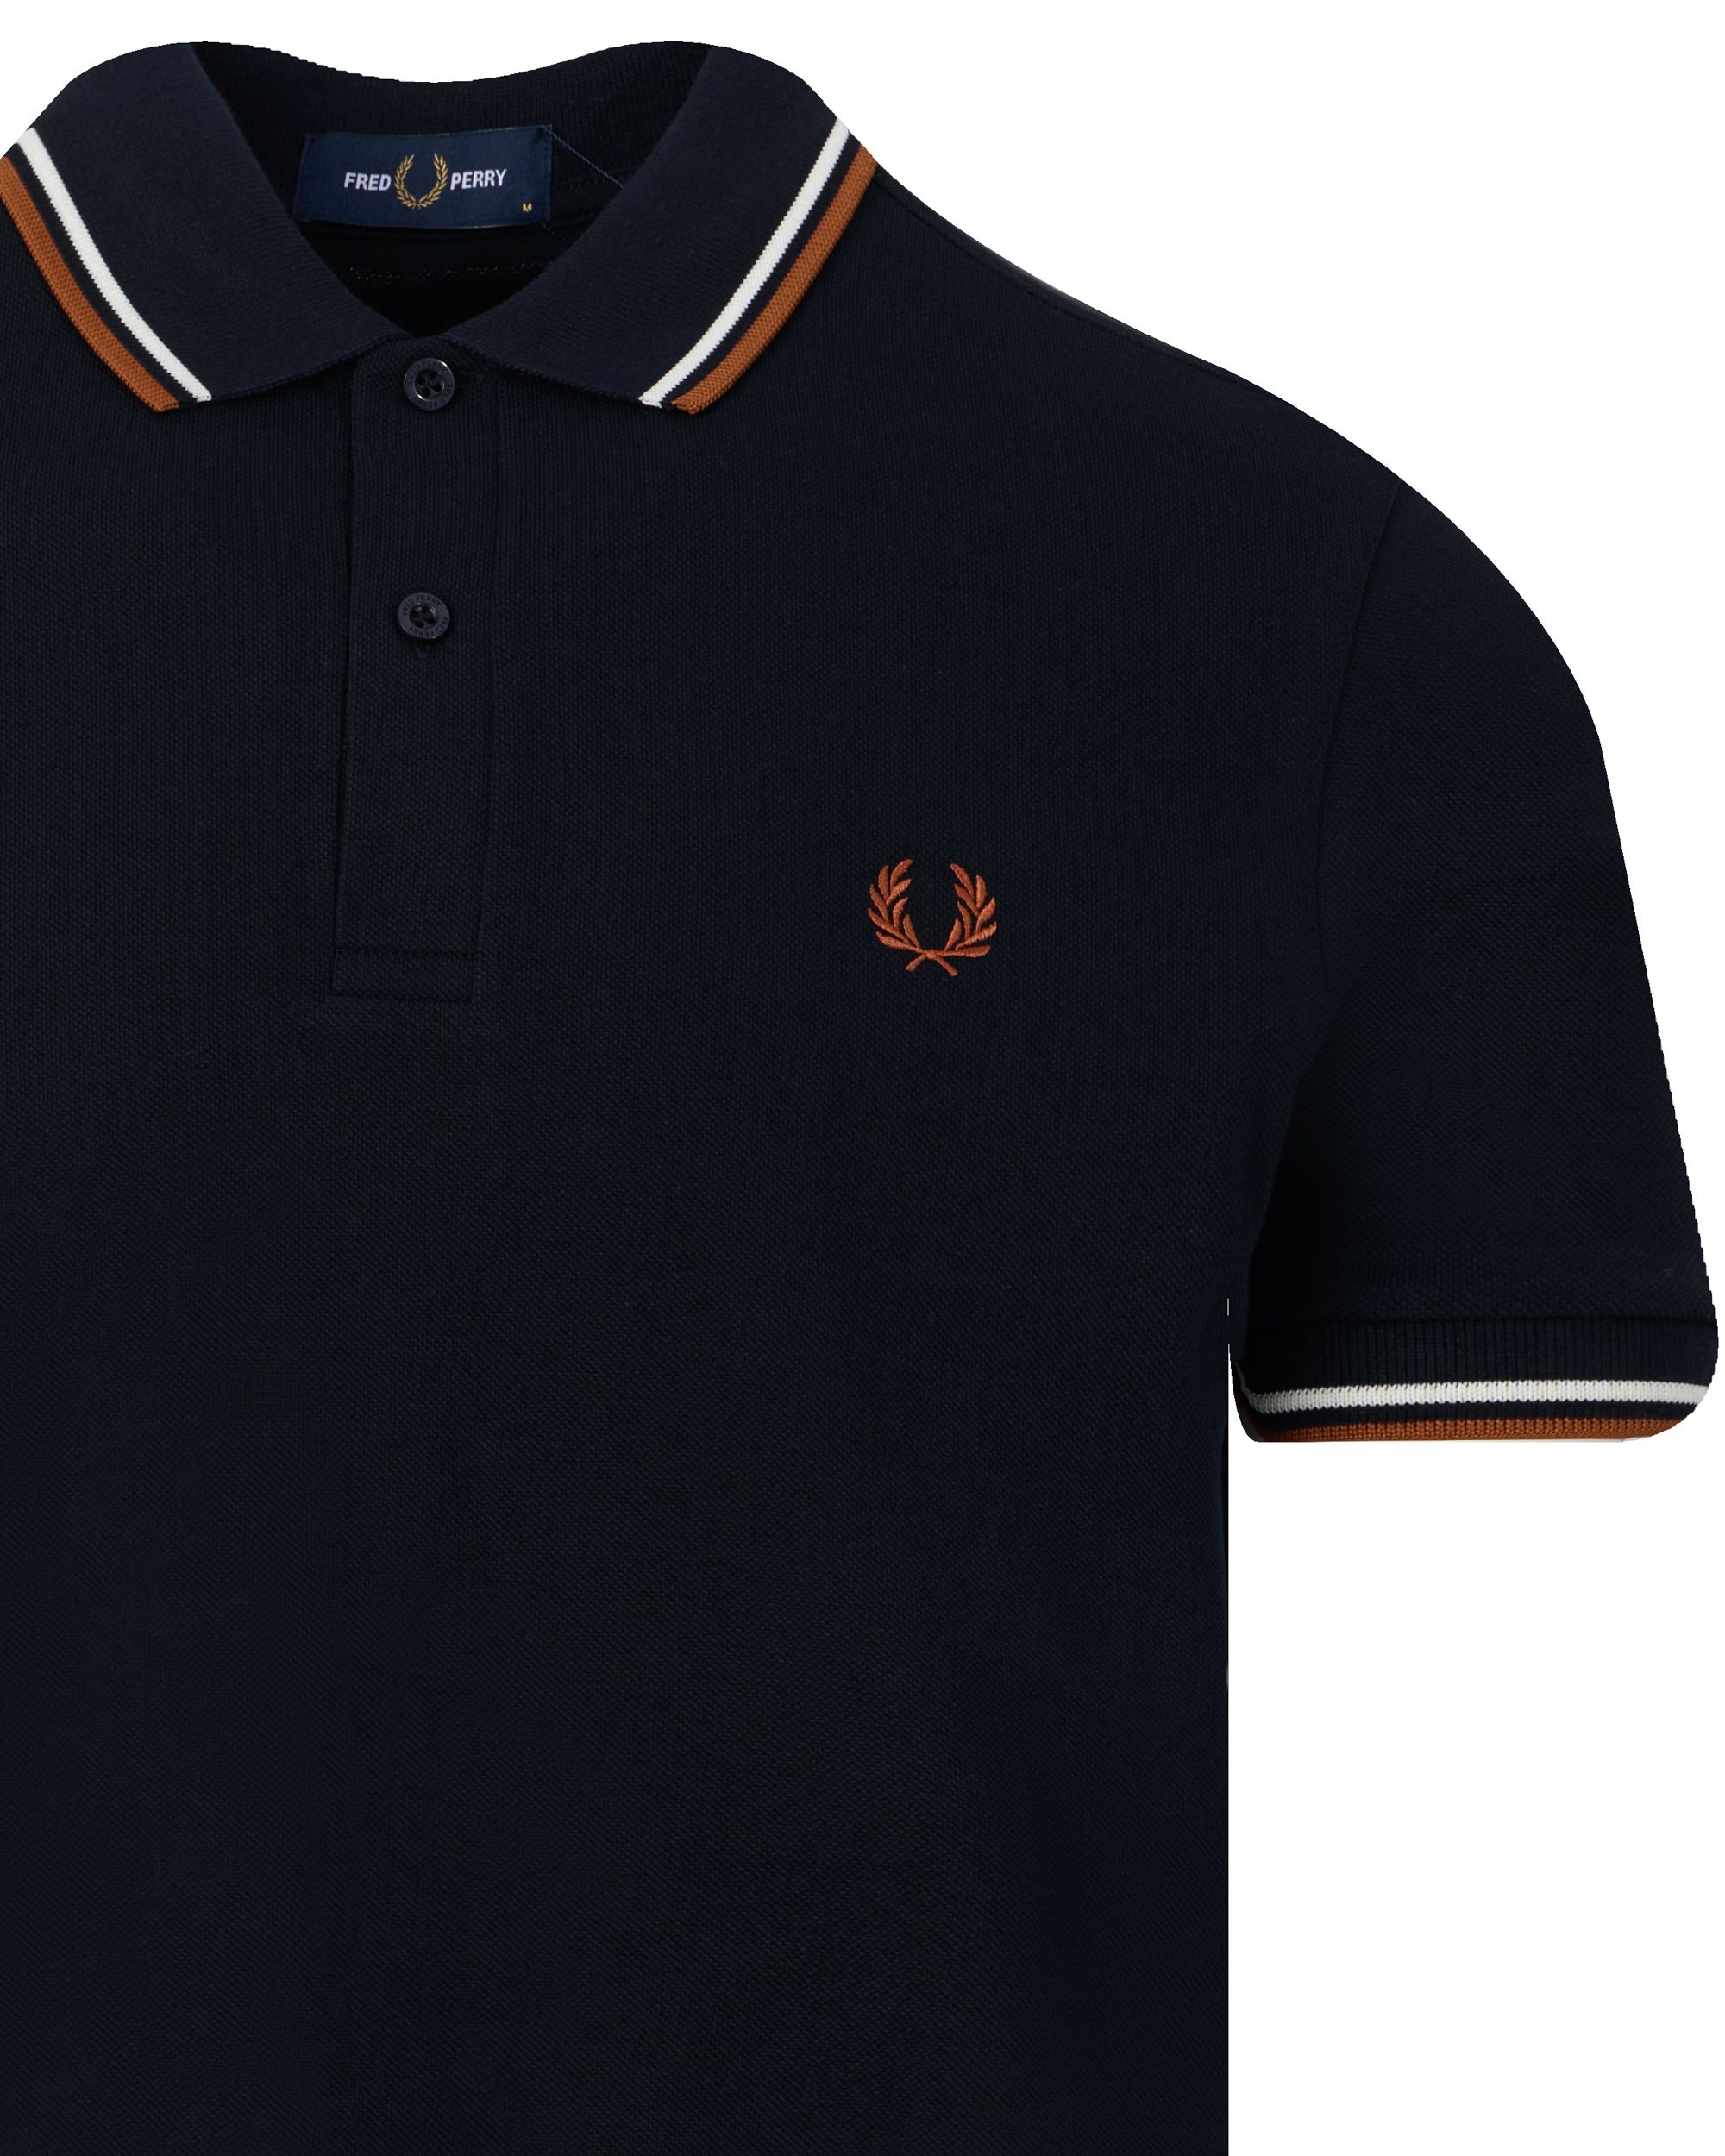 Fred Perry Polo KM Donker blauw 095673-001-L